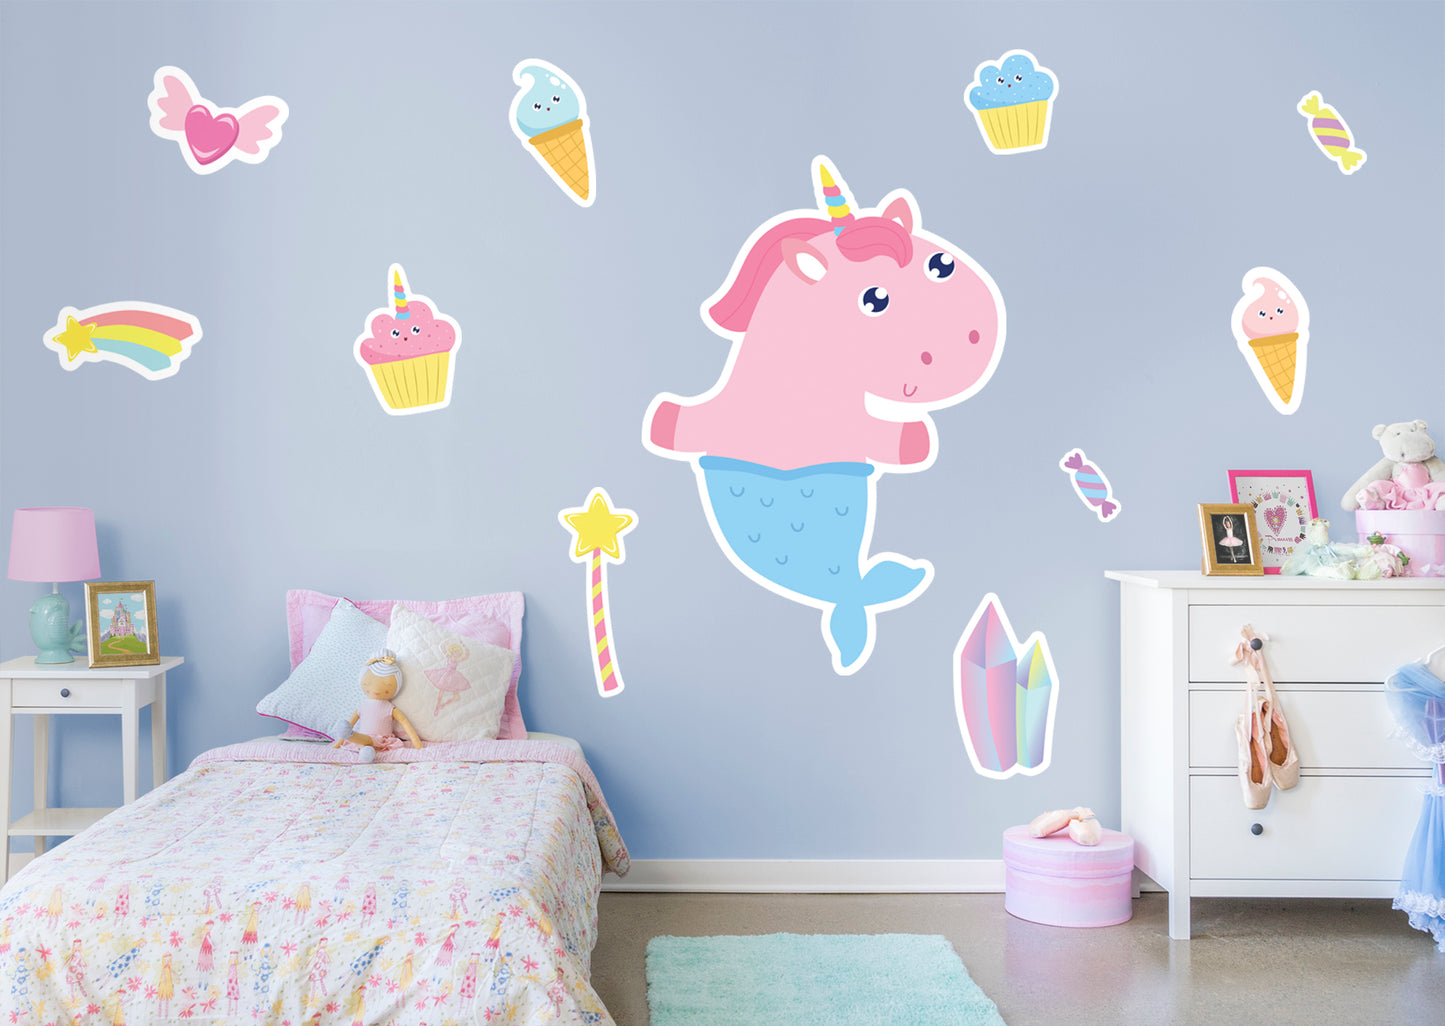 Life-Size Character +10 Decals  (43"W x 61"H)